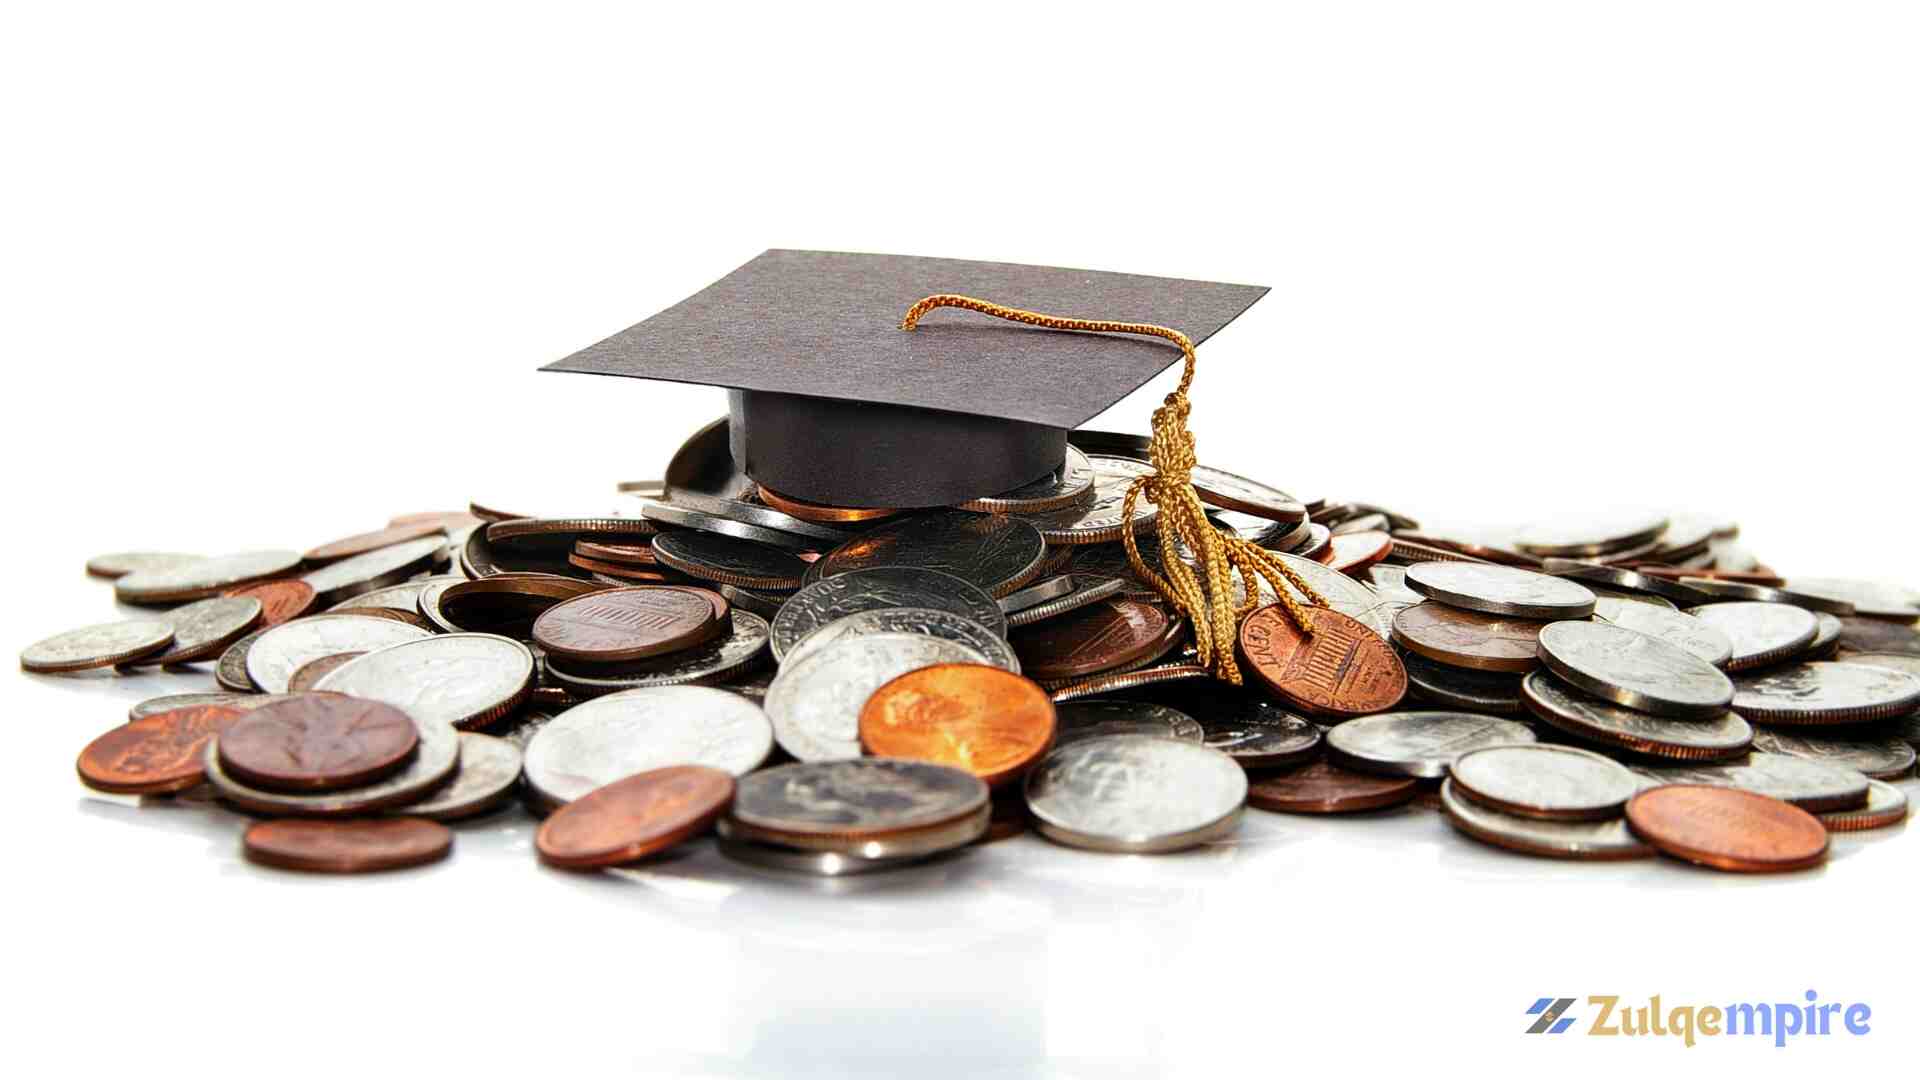 Hubei University Scholarships: Financial Aid Overview